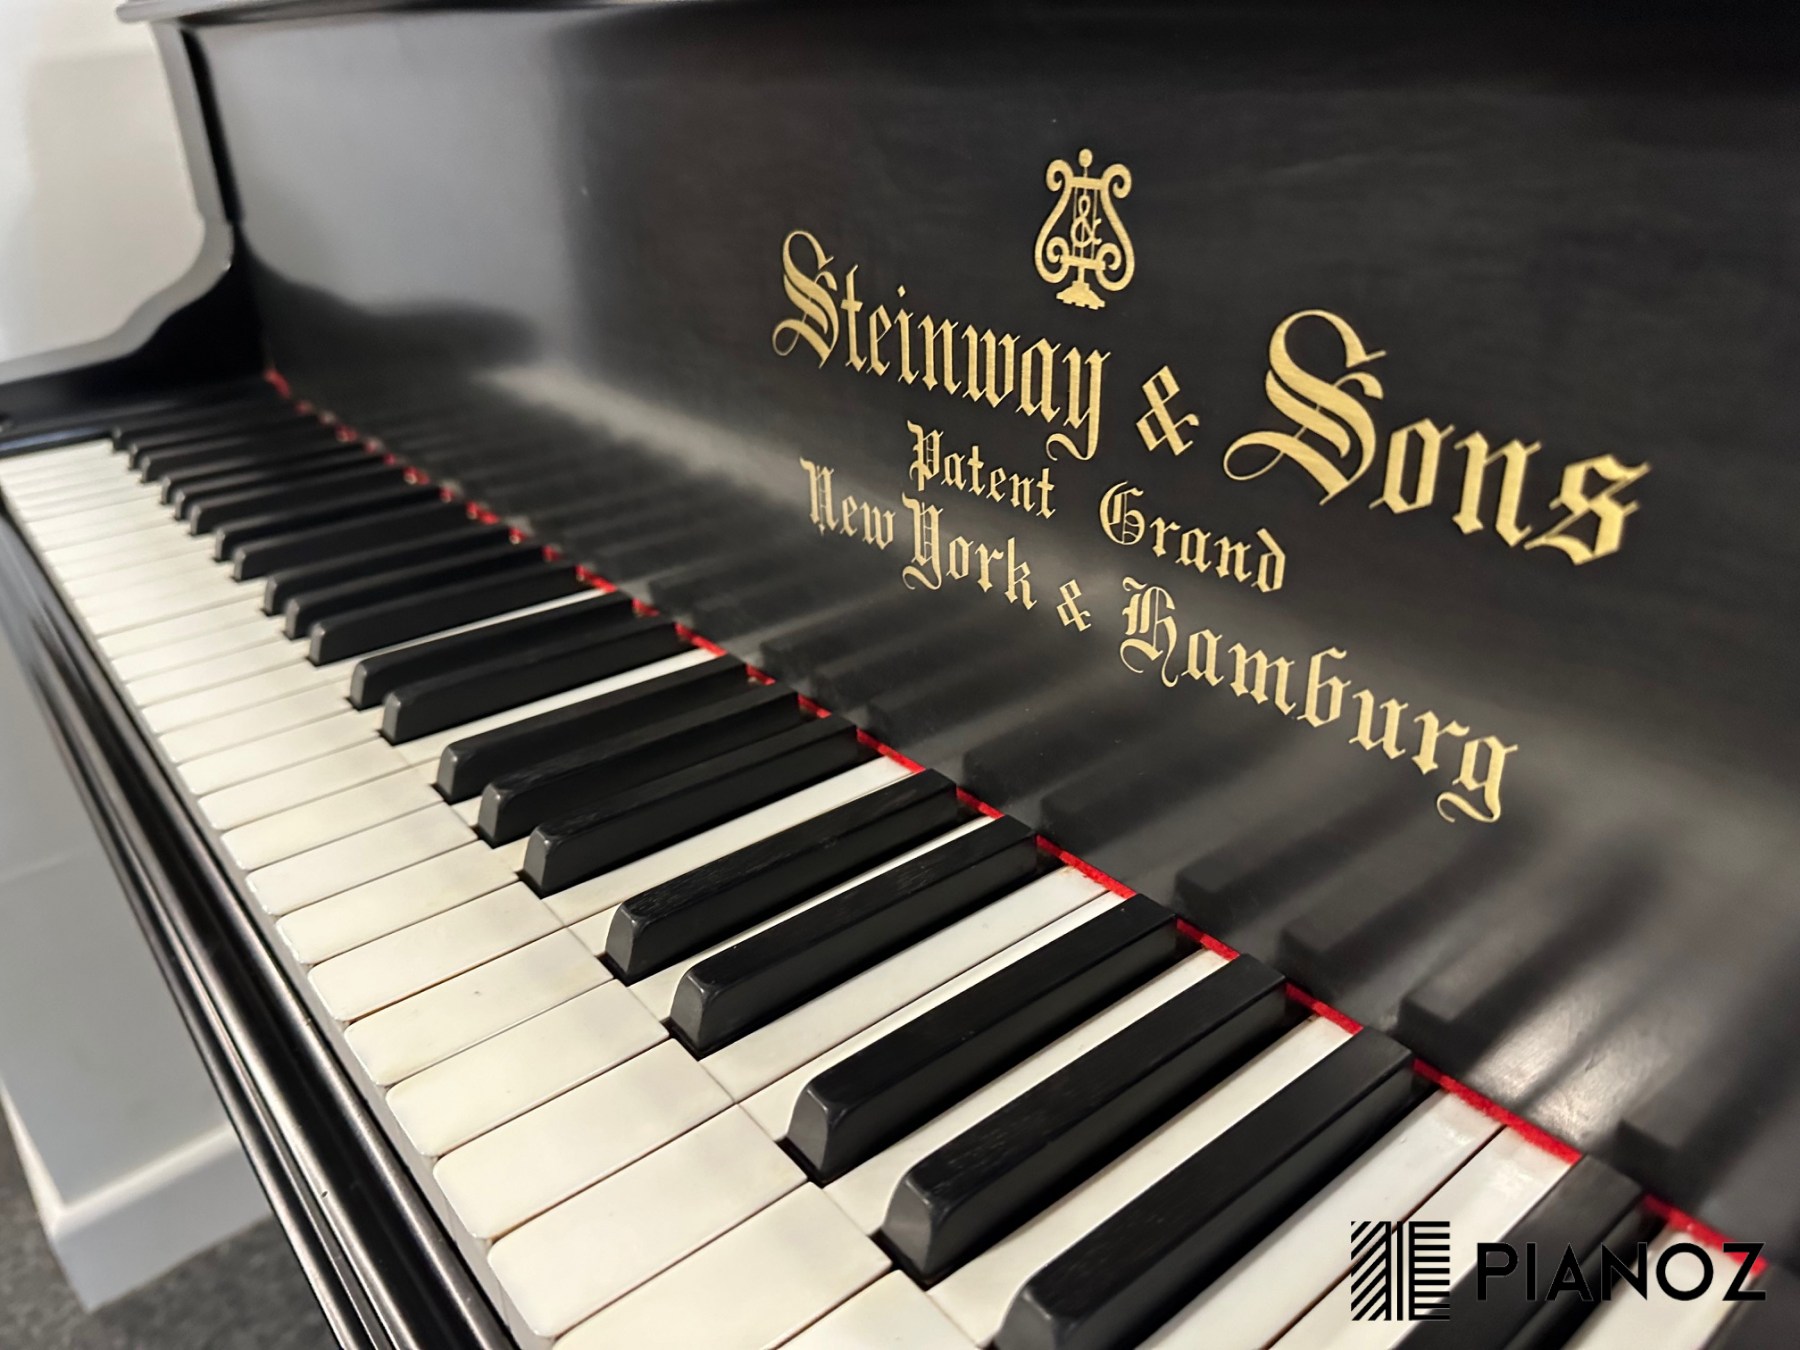 Steinway & Sons Model B Restored Grand Piano piano for sale in UK